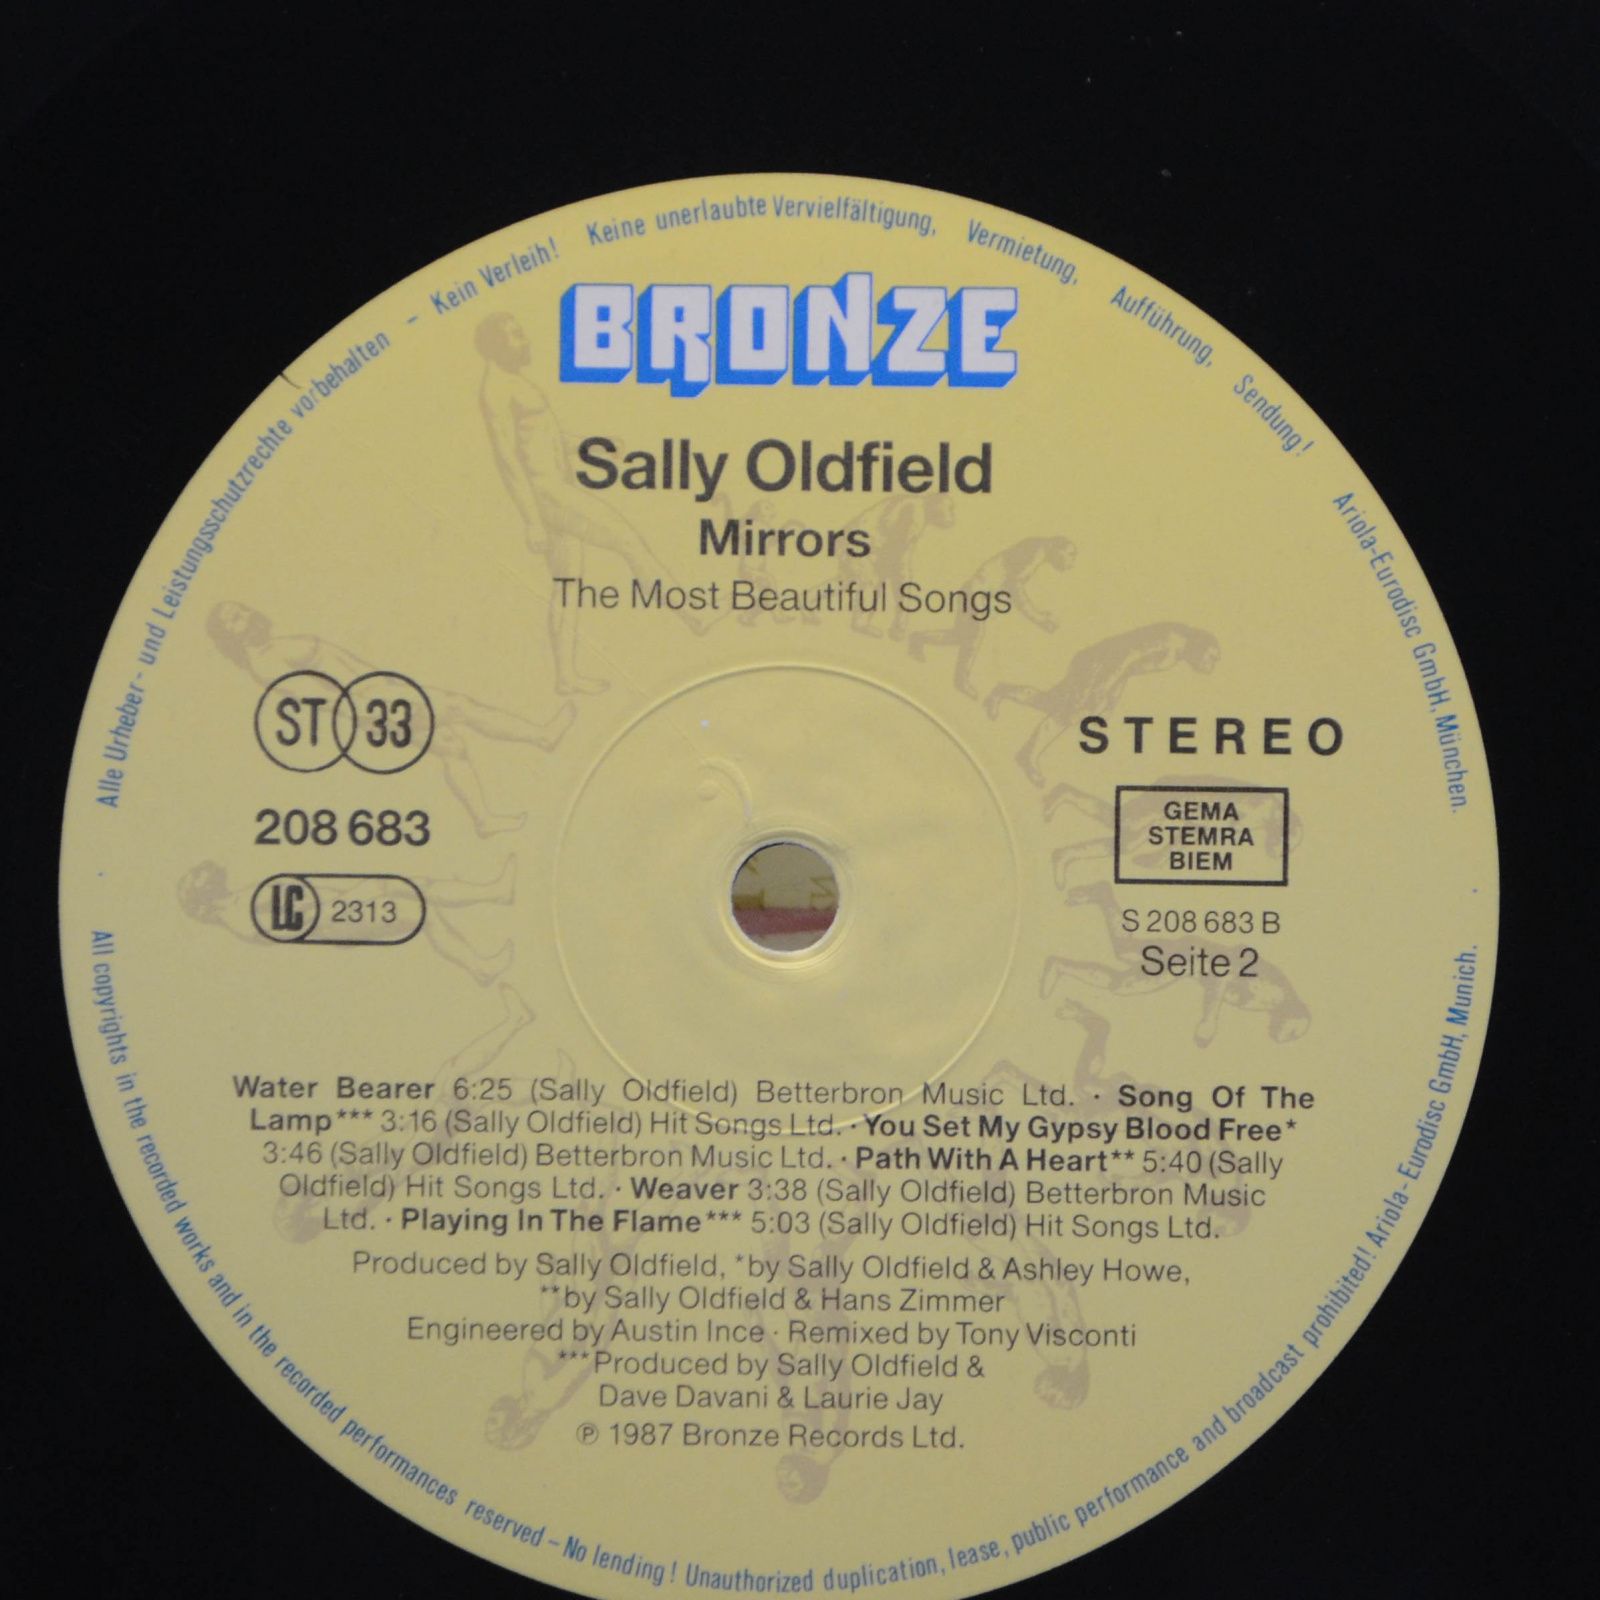 Sally Oldfield — Mirrors - The Most Beautiful Songs, 1987